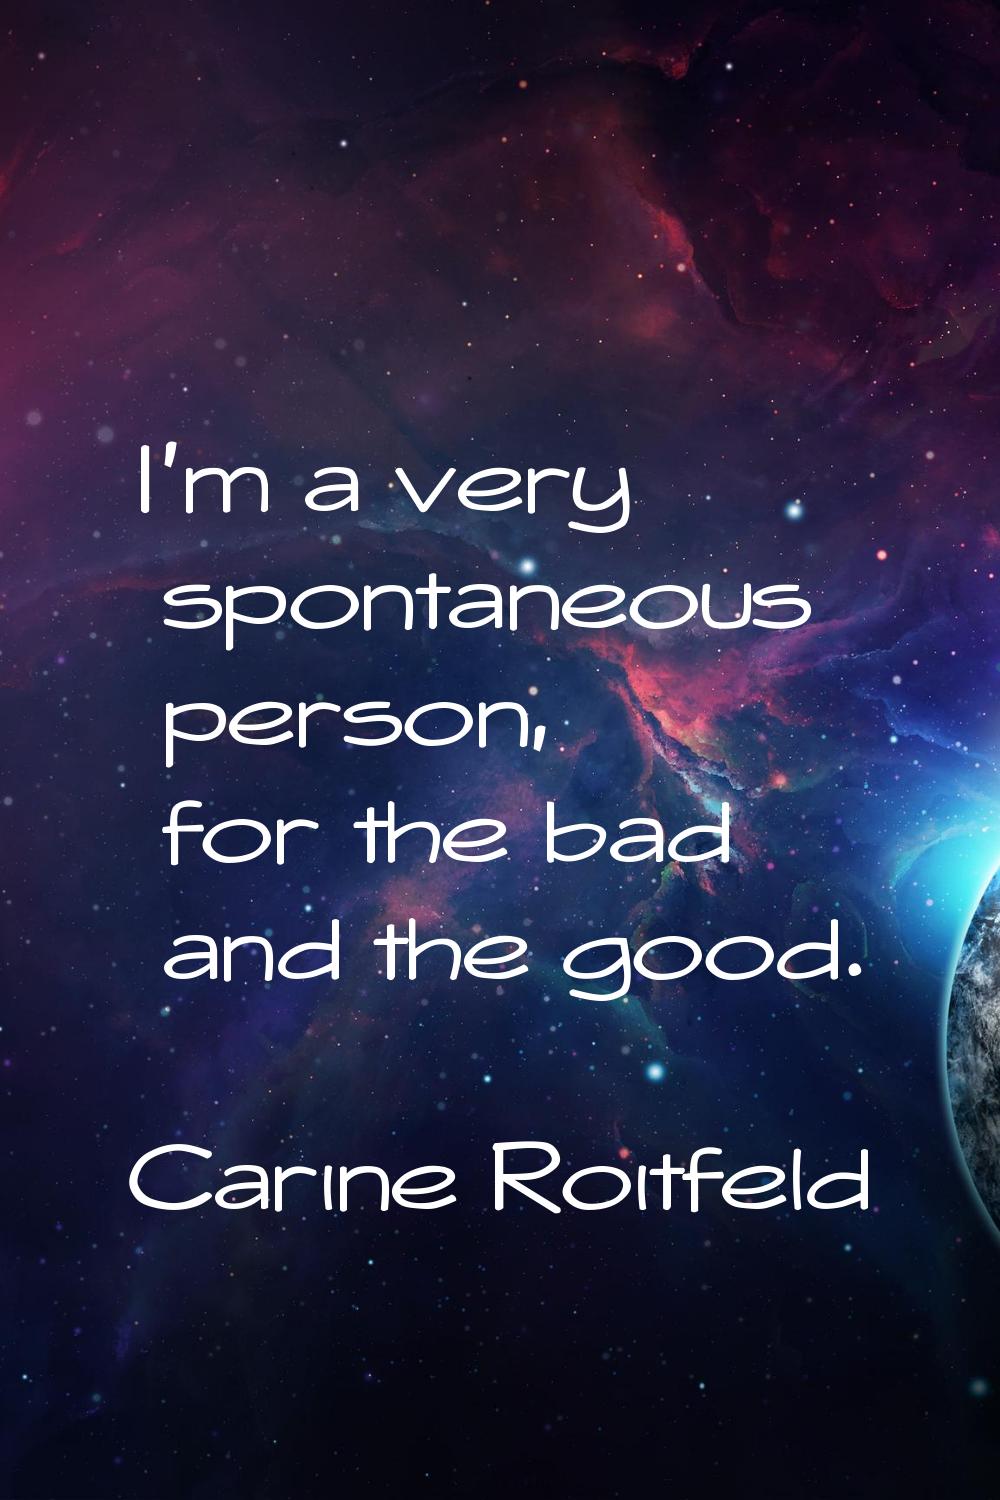 I'm a very spontaneous person, for the bad and the good.